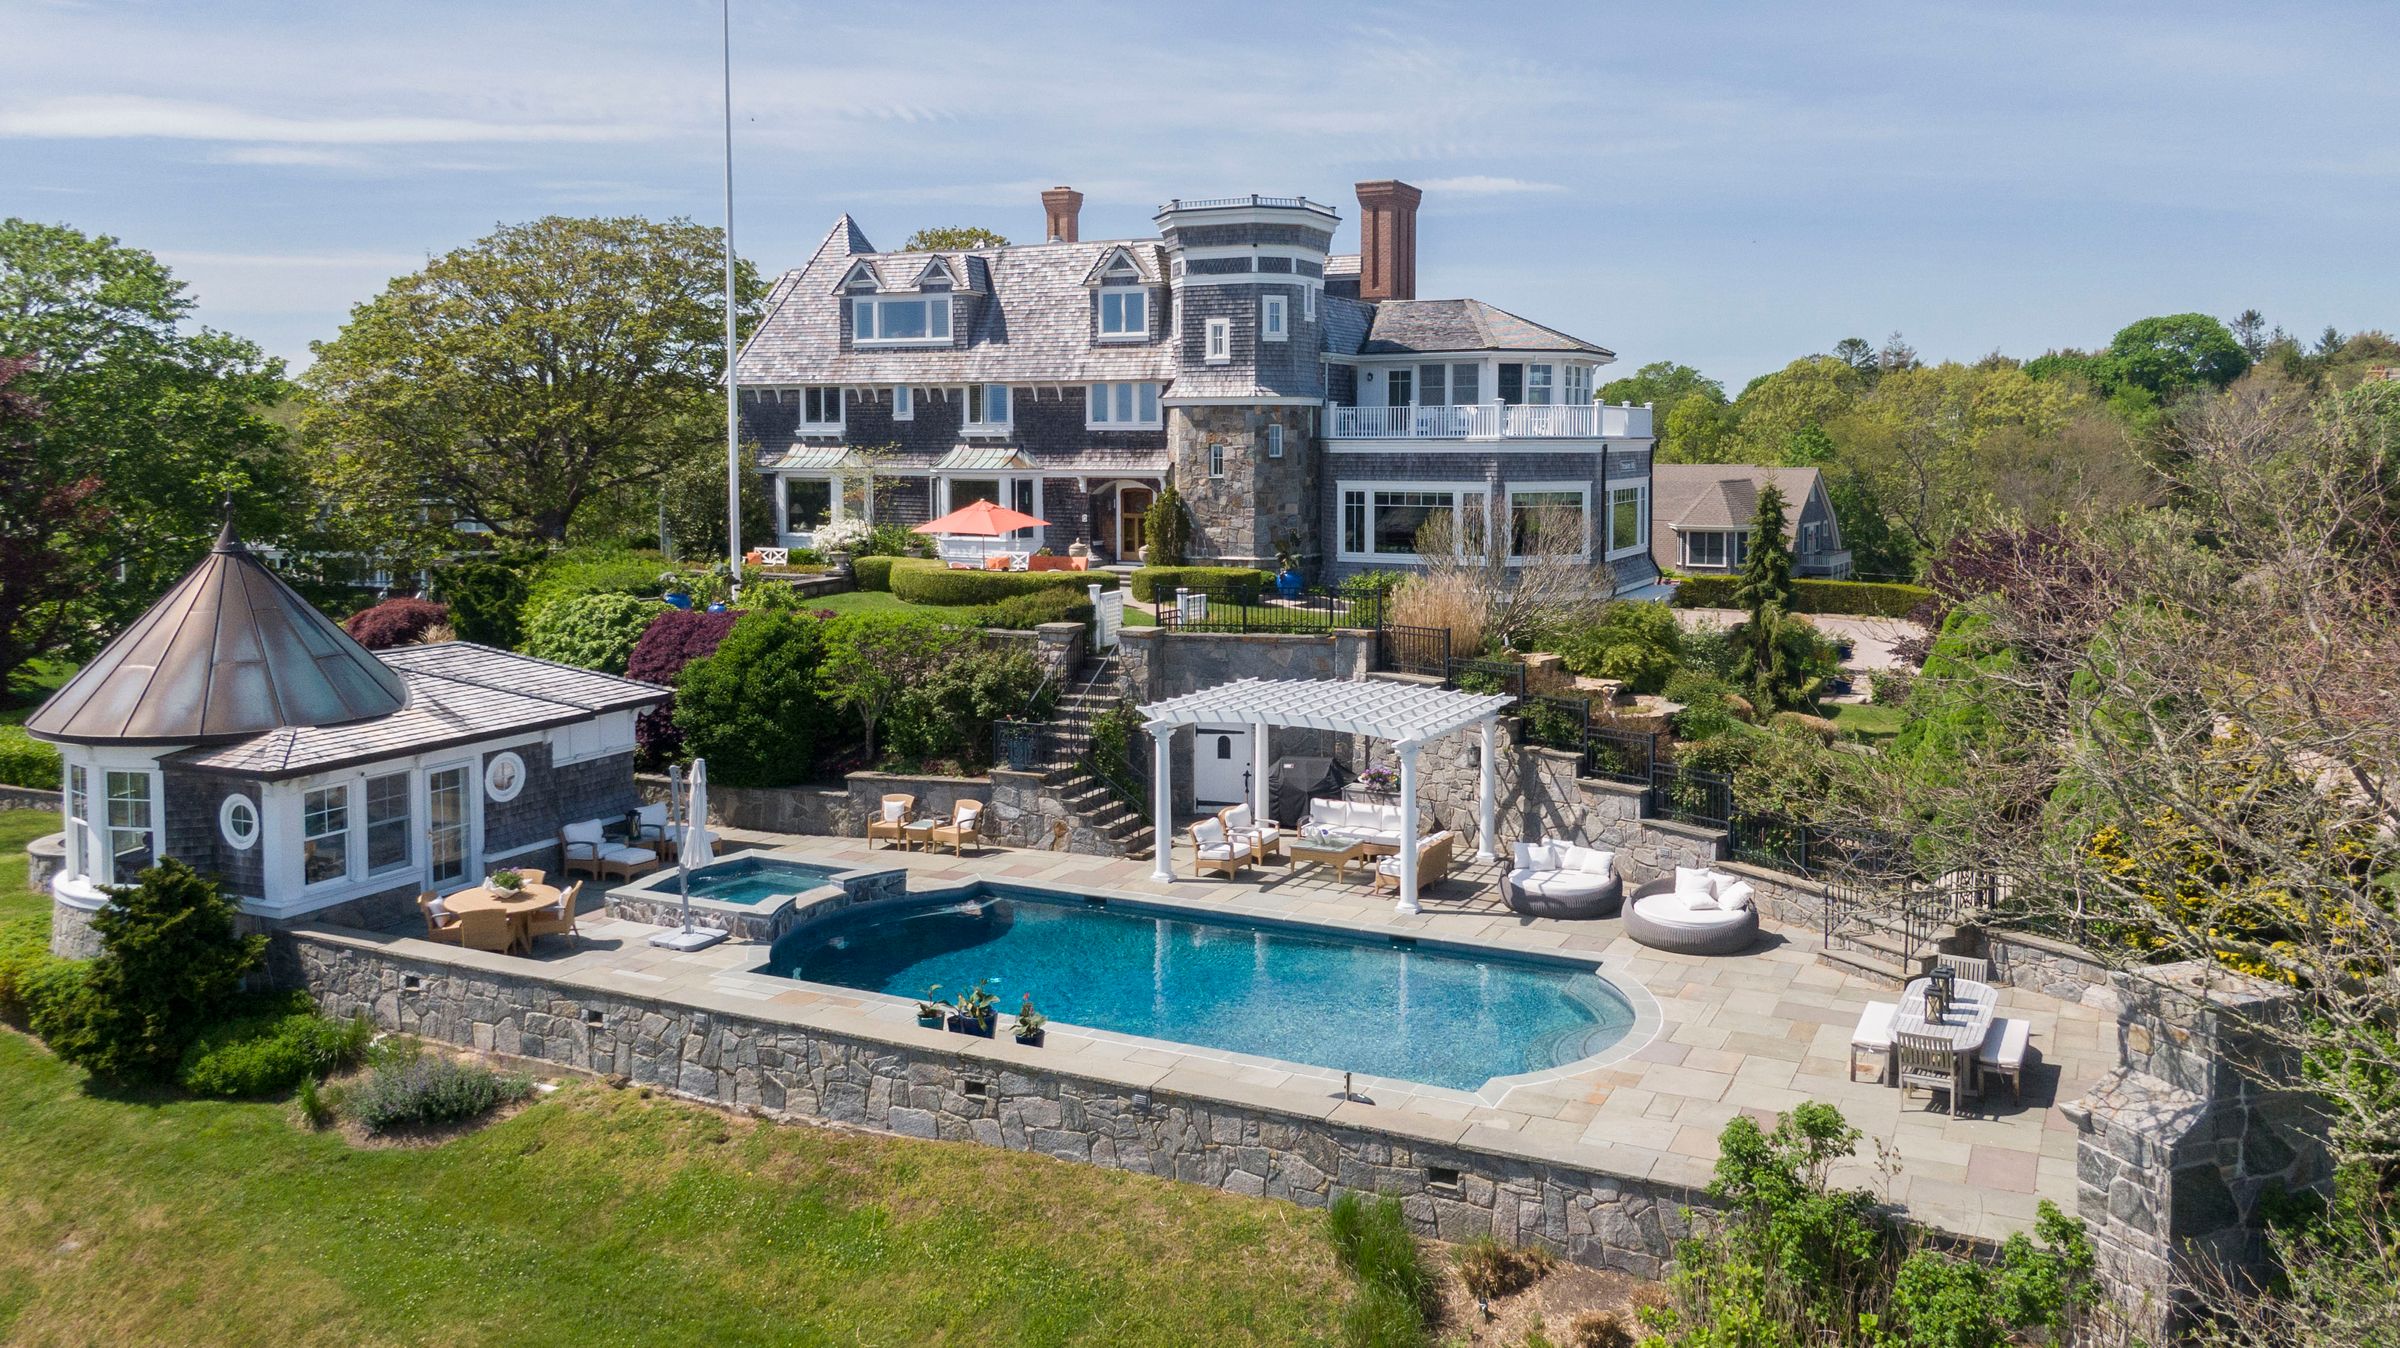 R.I.’s highest home sale so far this year is a $17.7m coastal estate in Watch Hill